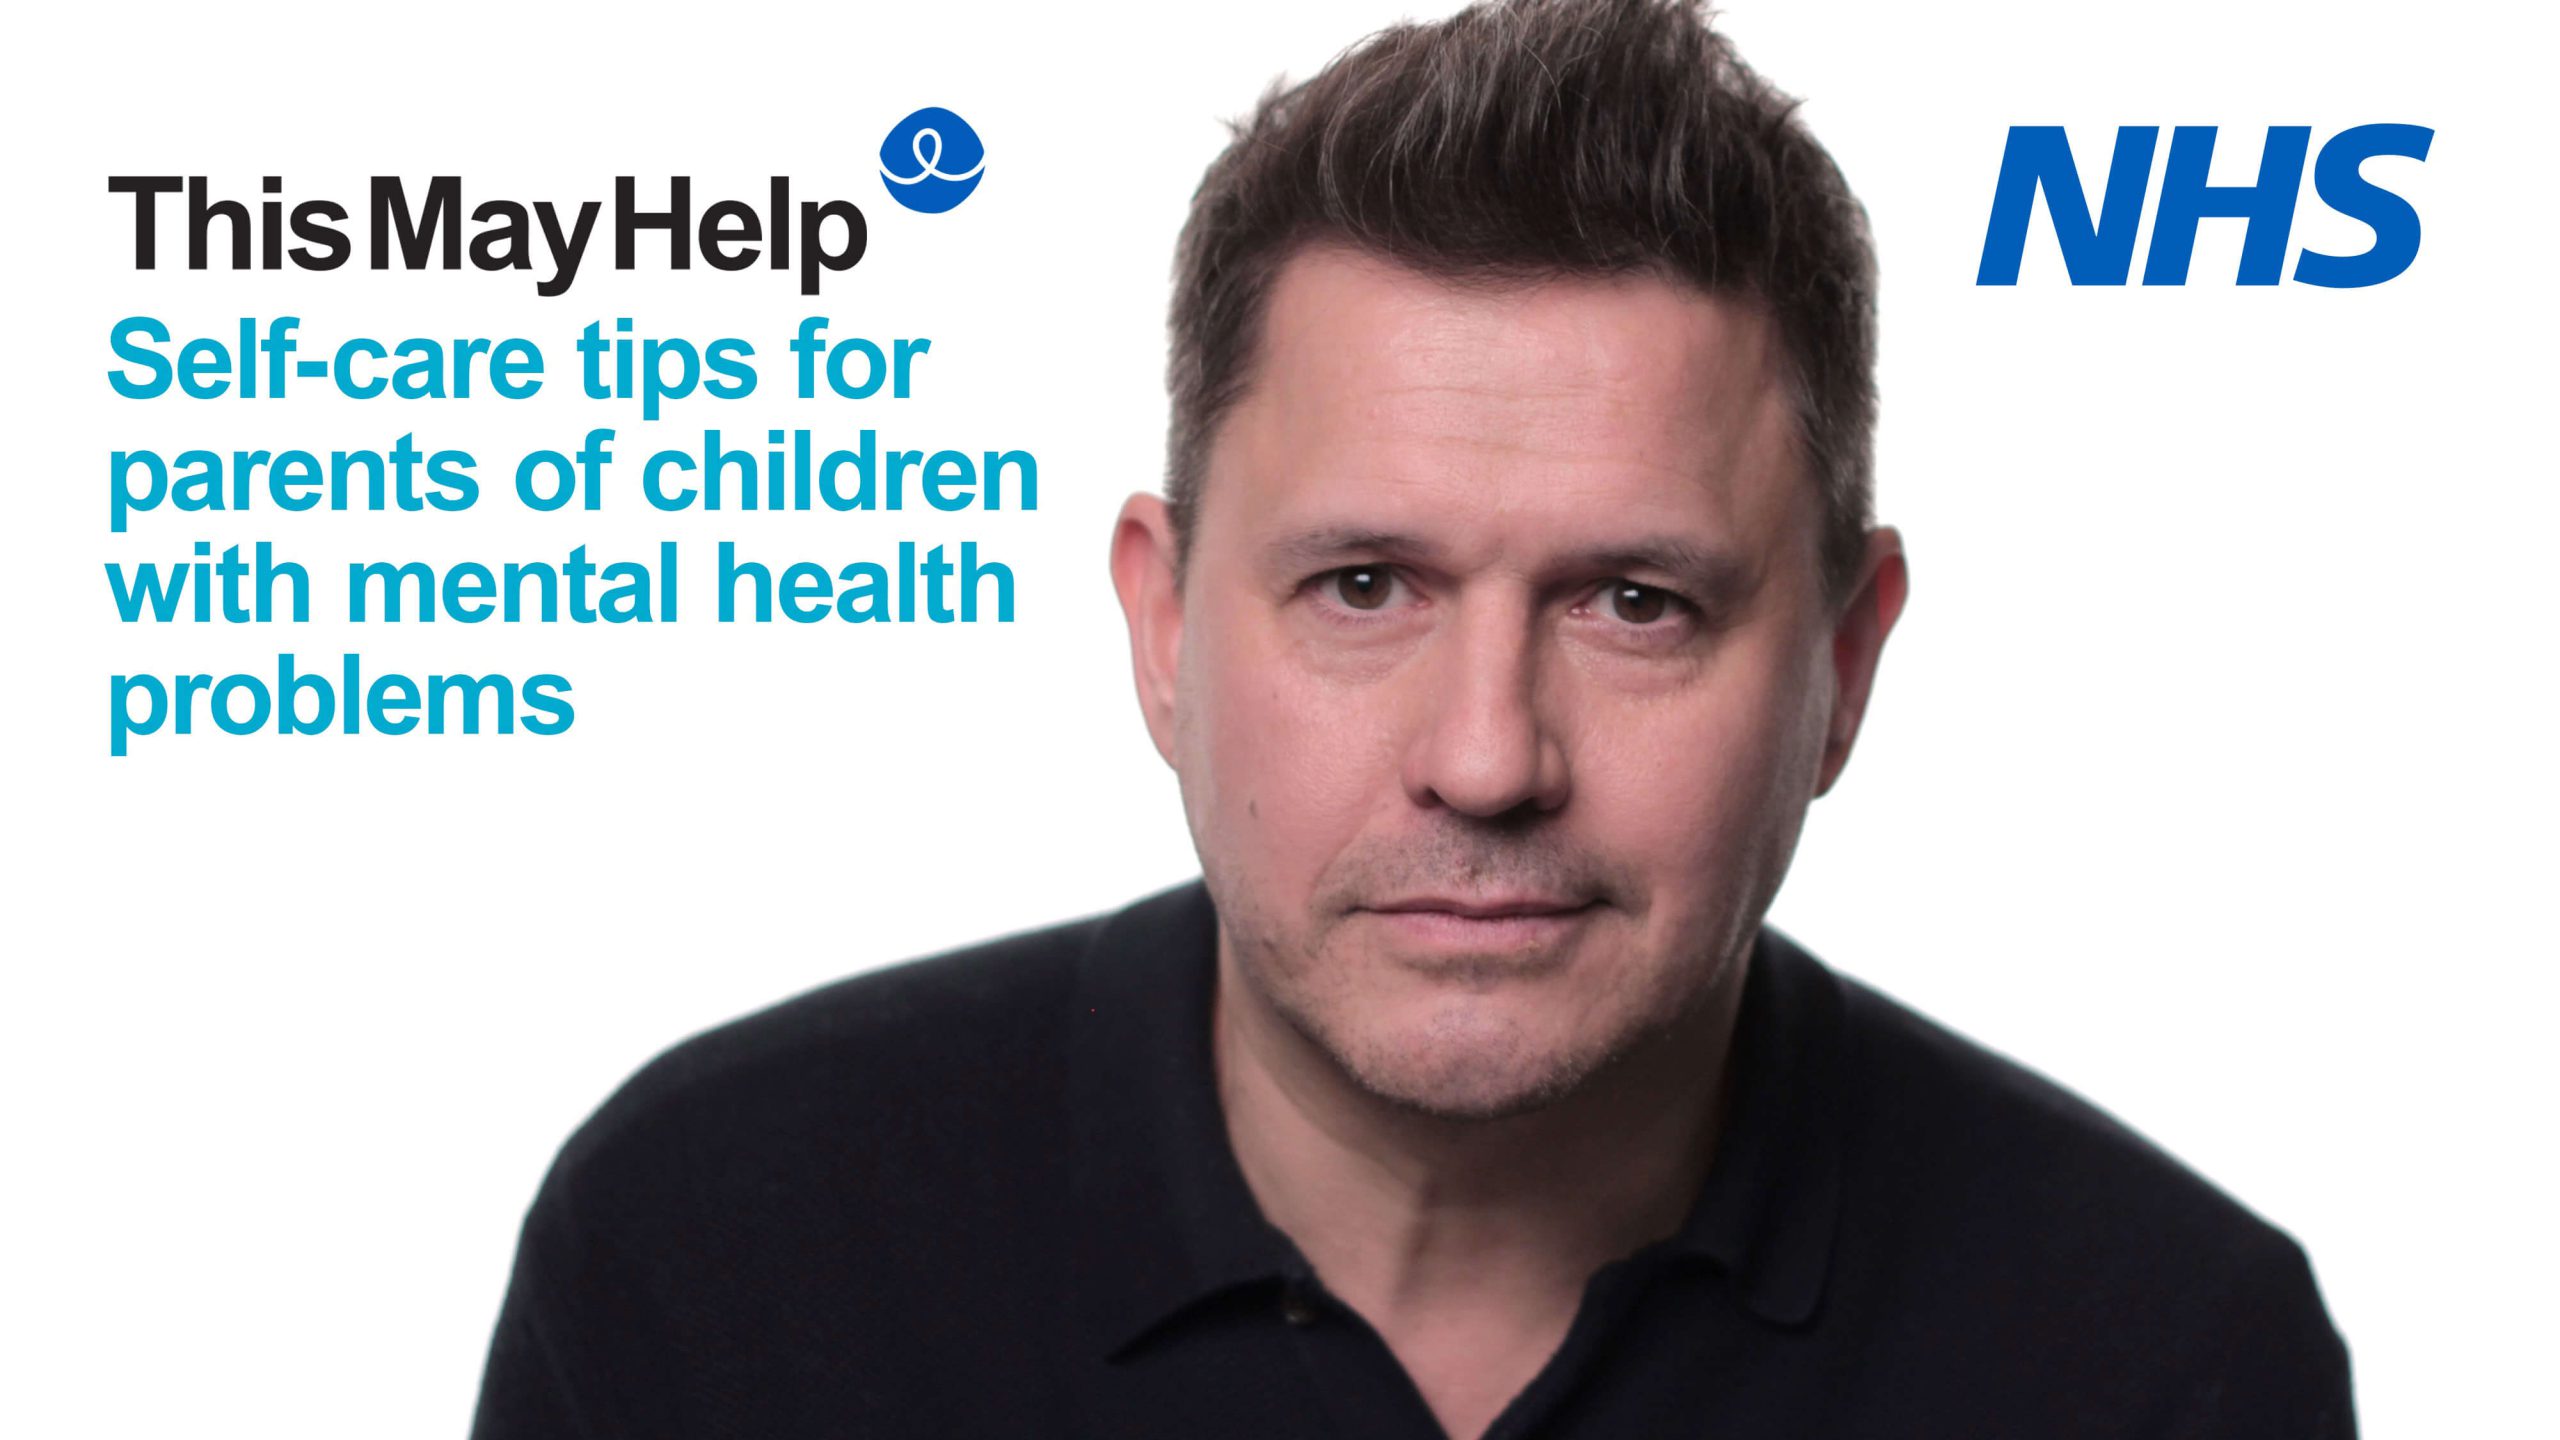 Self-care tips for parents of children with mental health problems